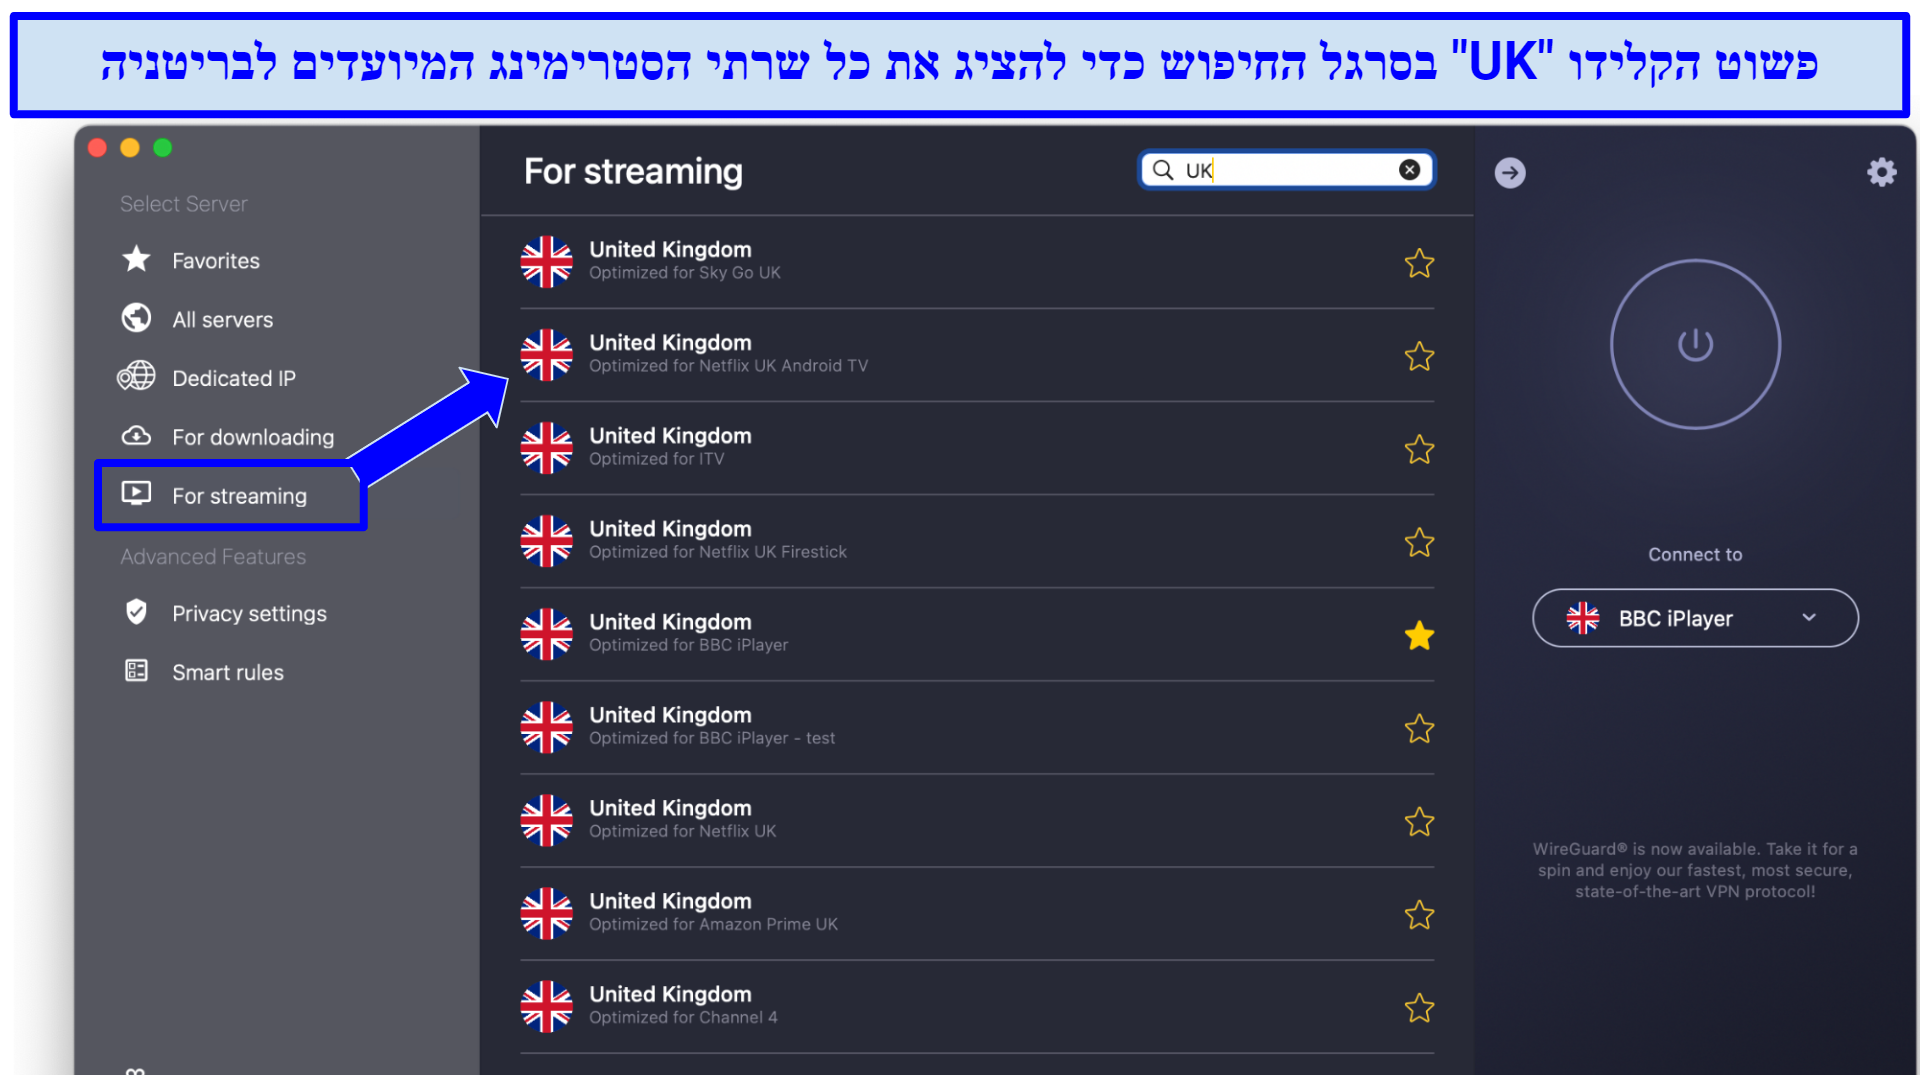 Screenshot showing CyberGhost's streaming optimized servers